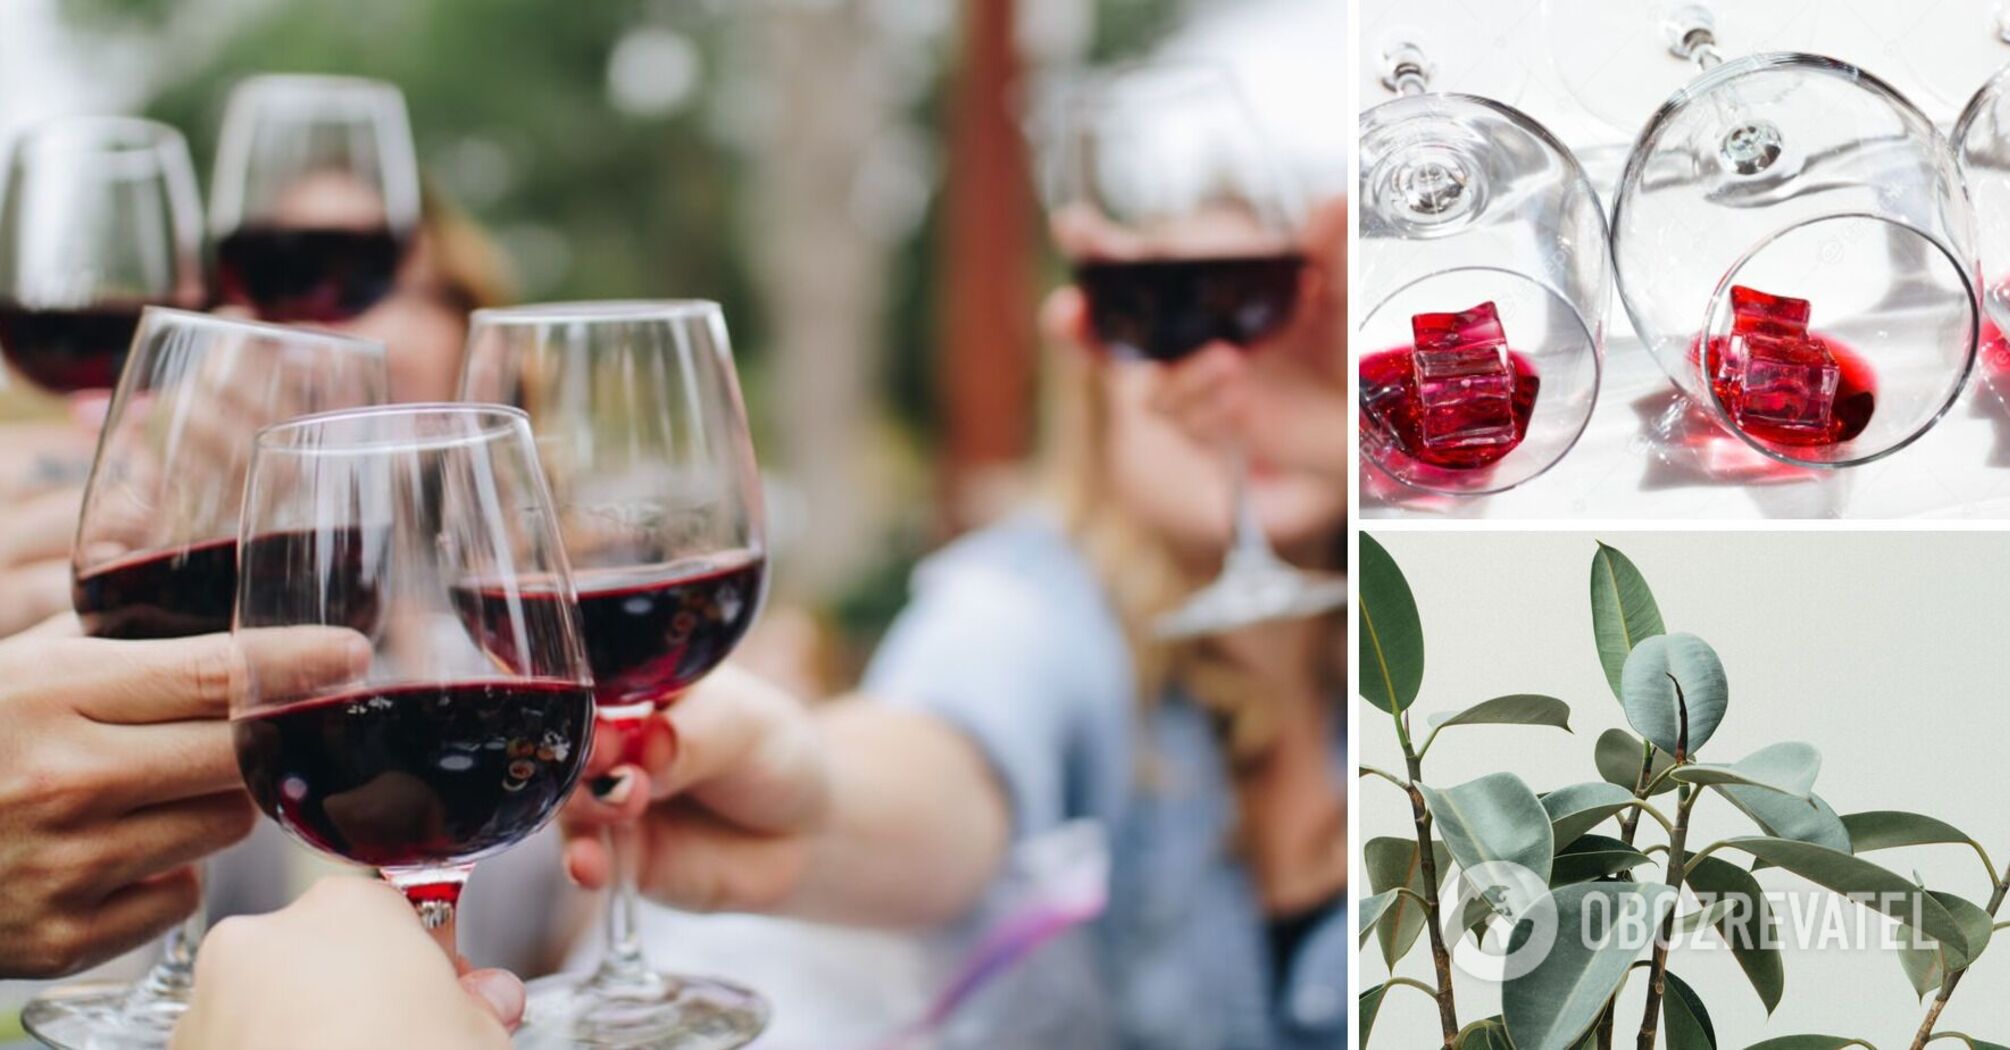 Six unexpected ways to use wine in everyday life